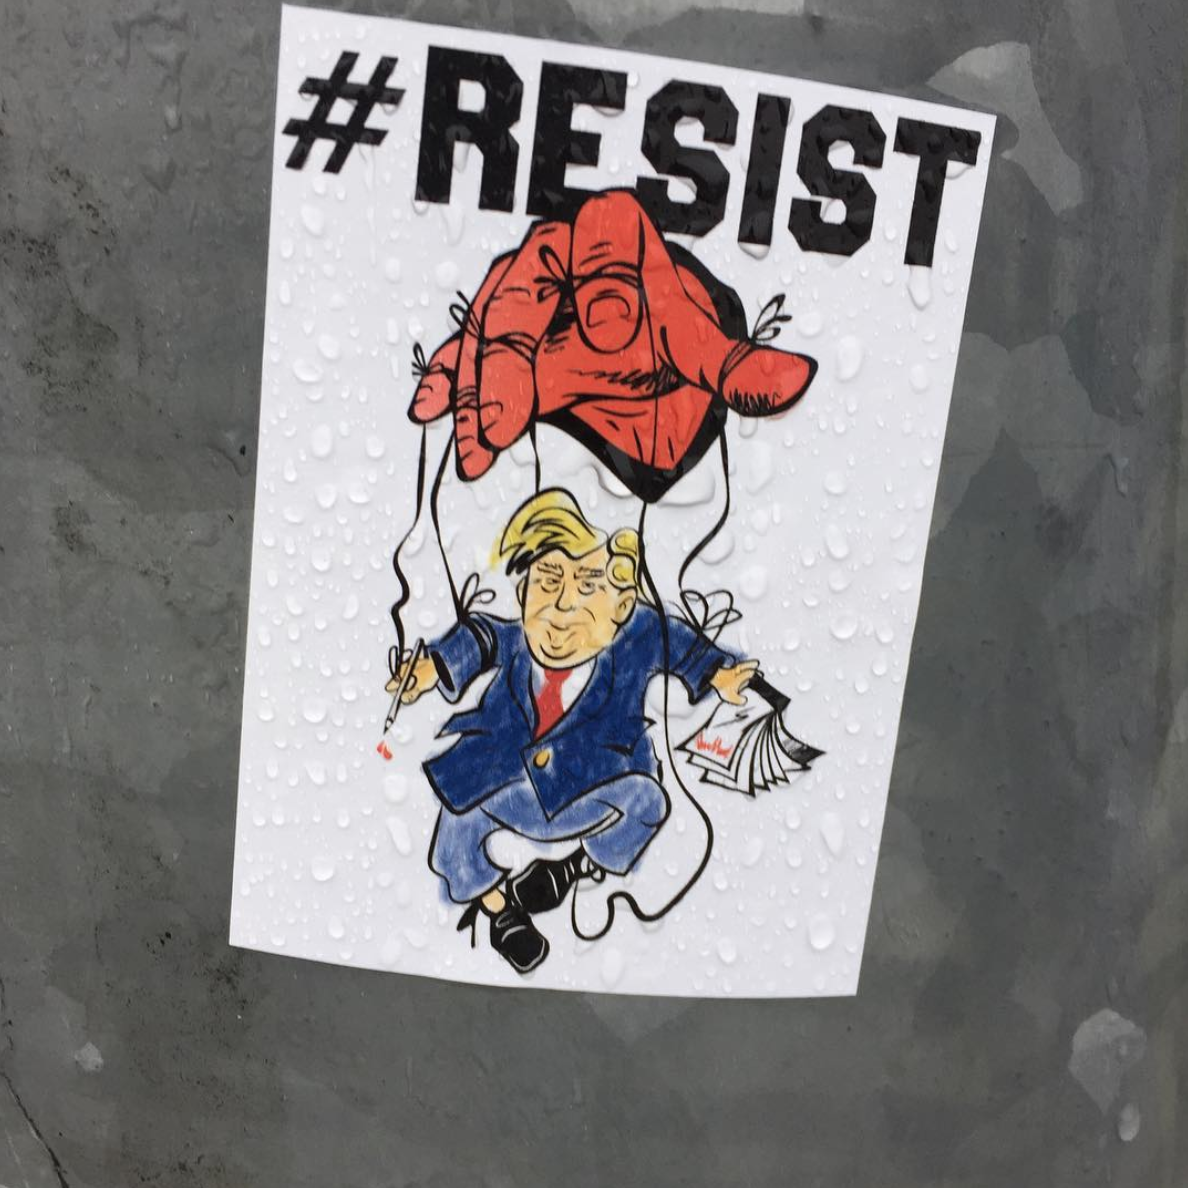 Picture of President Trump as a marionette doll controlled by a red hand with the caption "#RESIST"